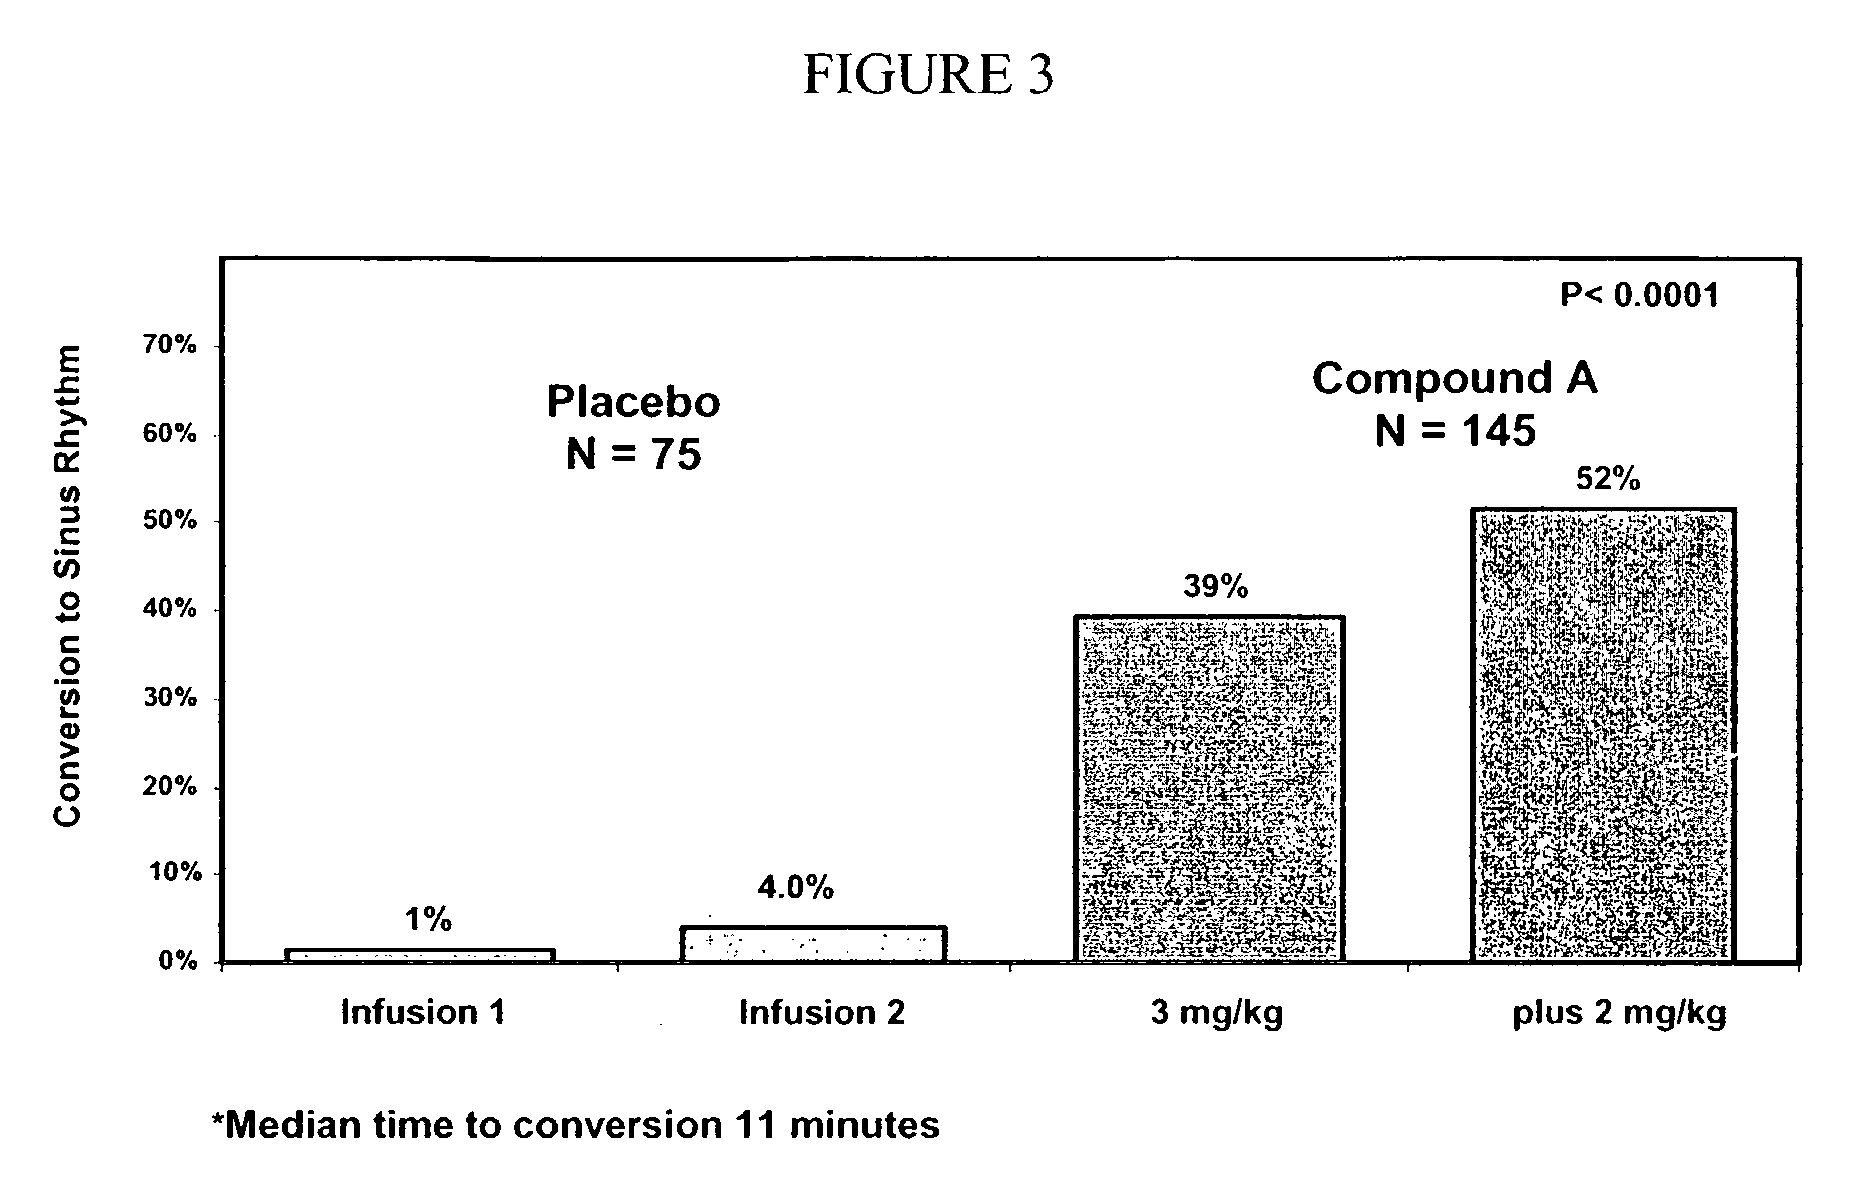 Dosing regimens for ion channel modulating compounds